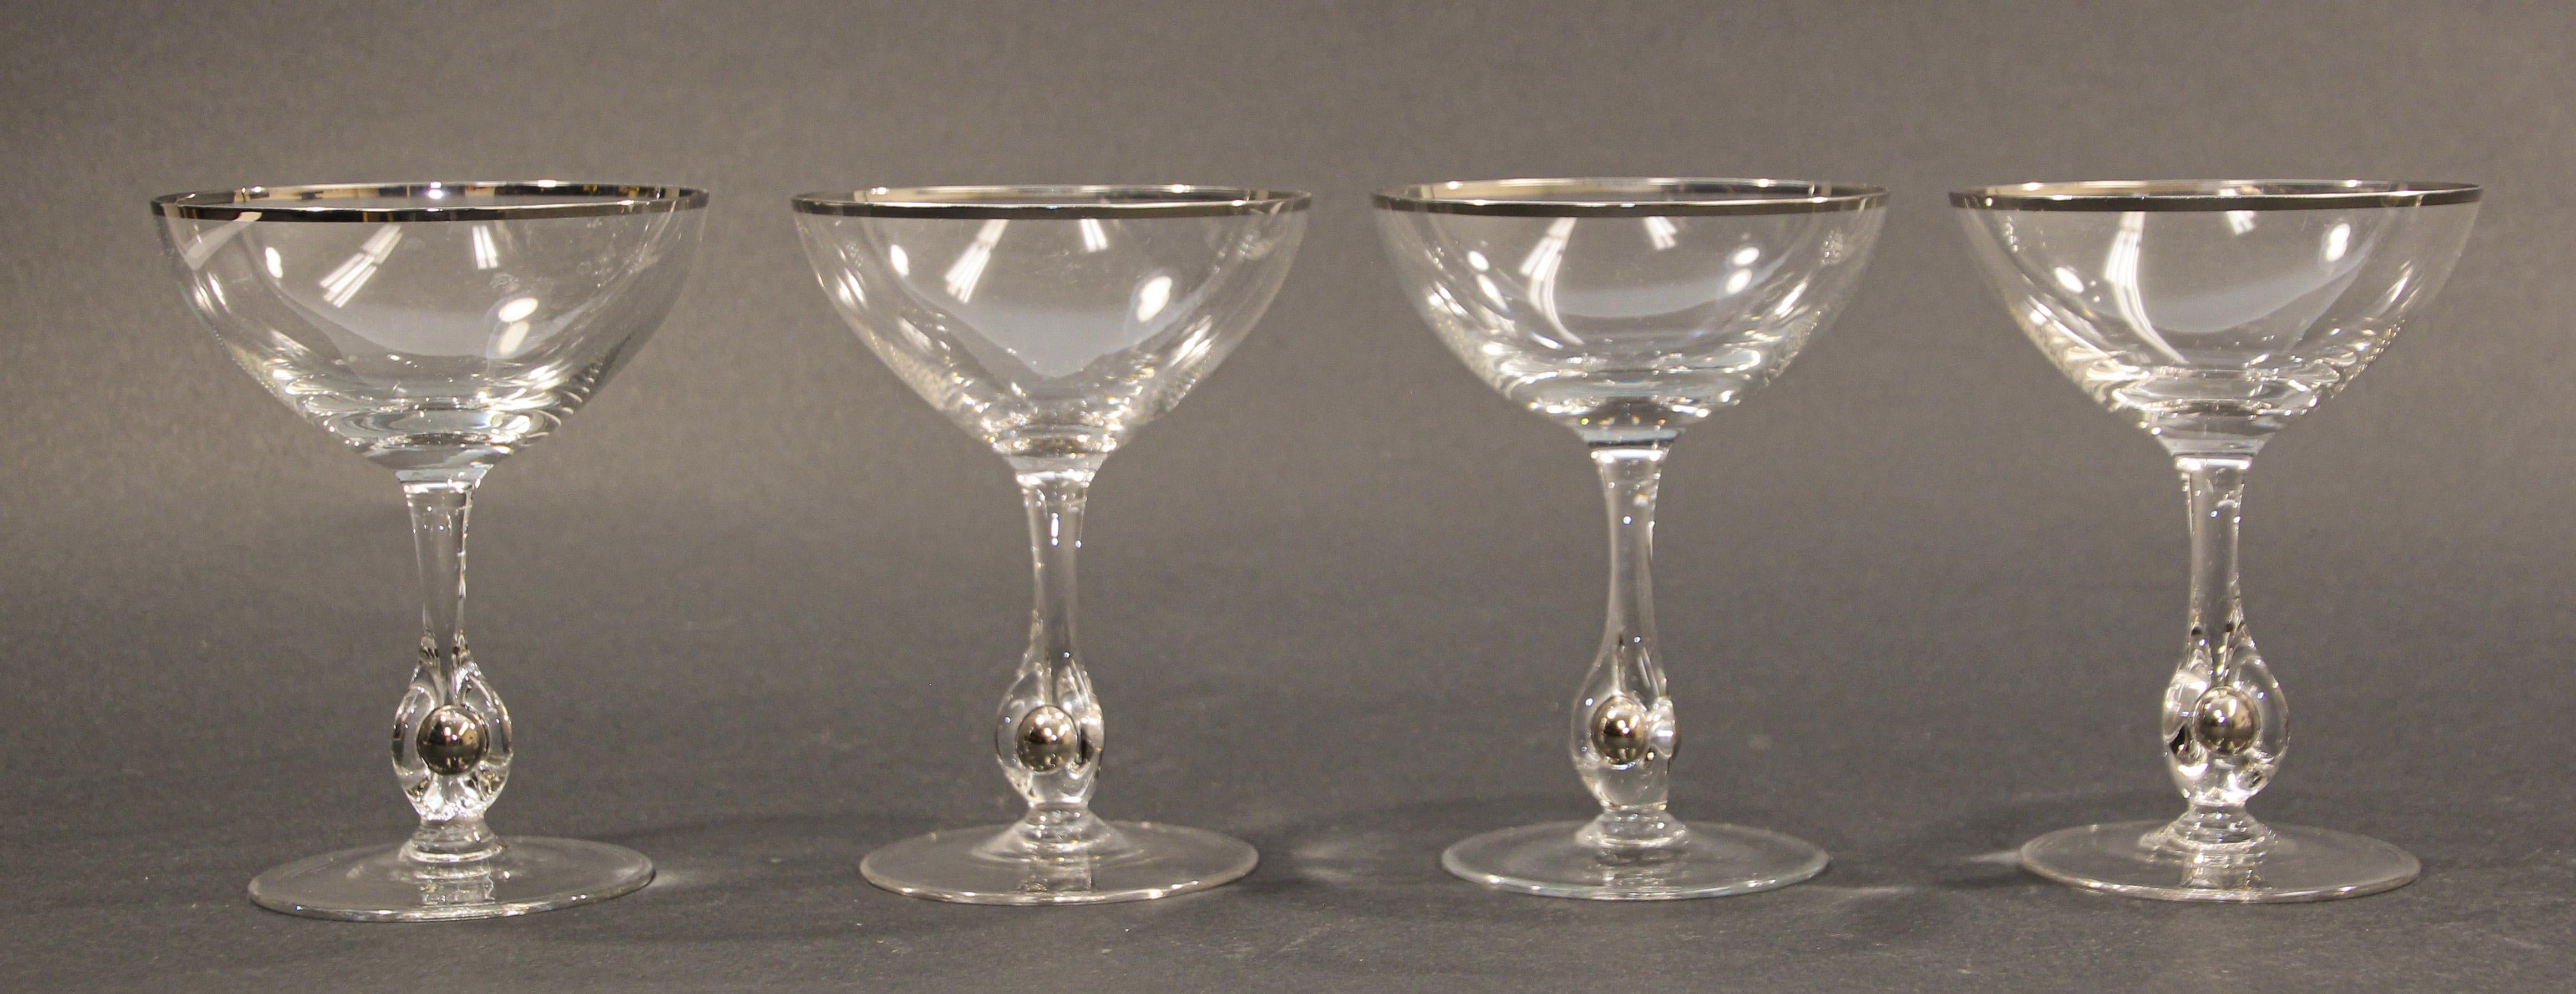 Crystal Footed Champagne Glasses with Silver Rim For Sale 10